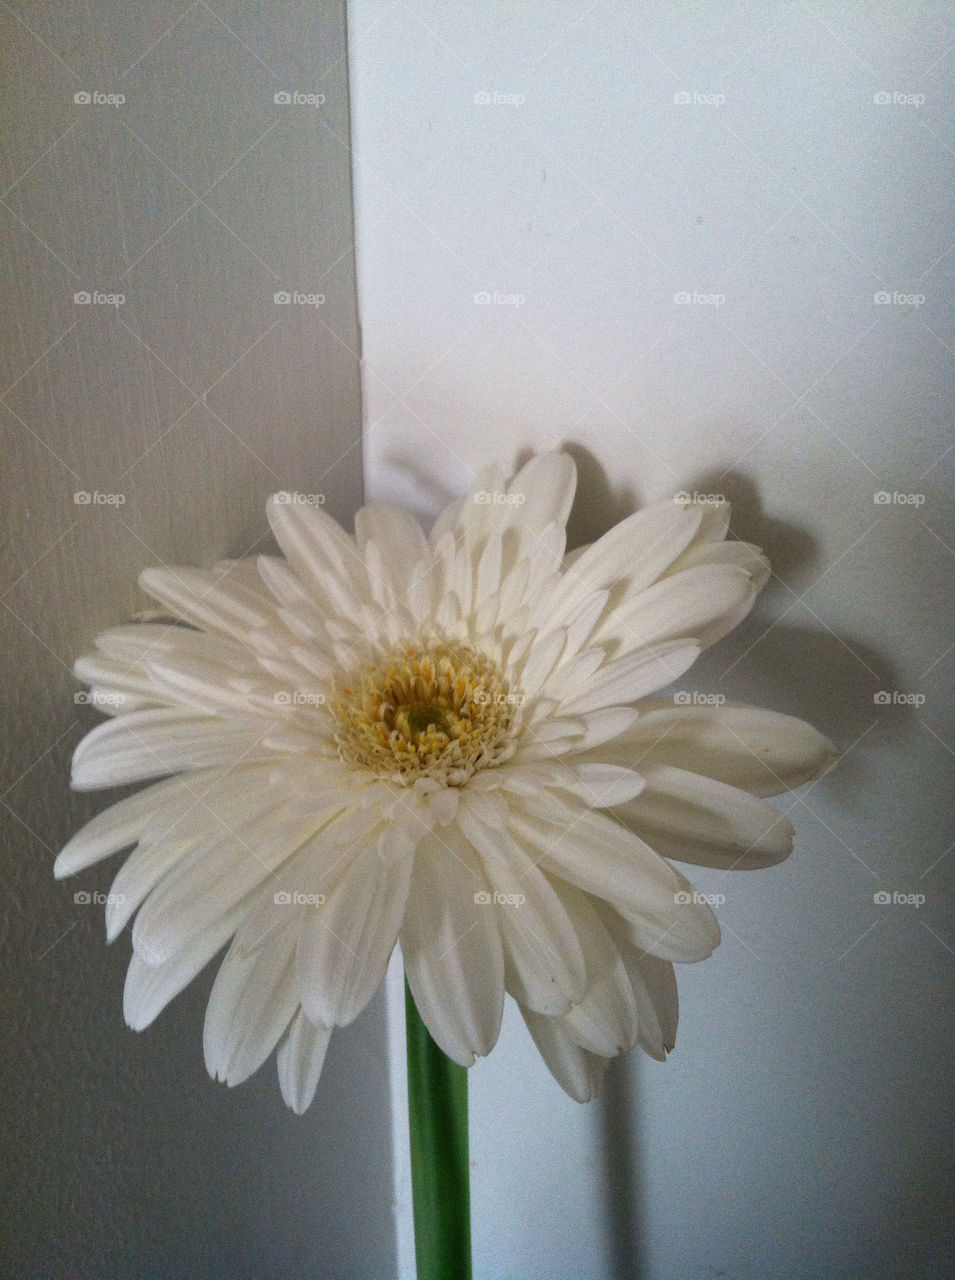 flower white fresh daisy by snapd